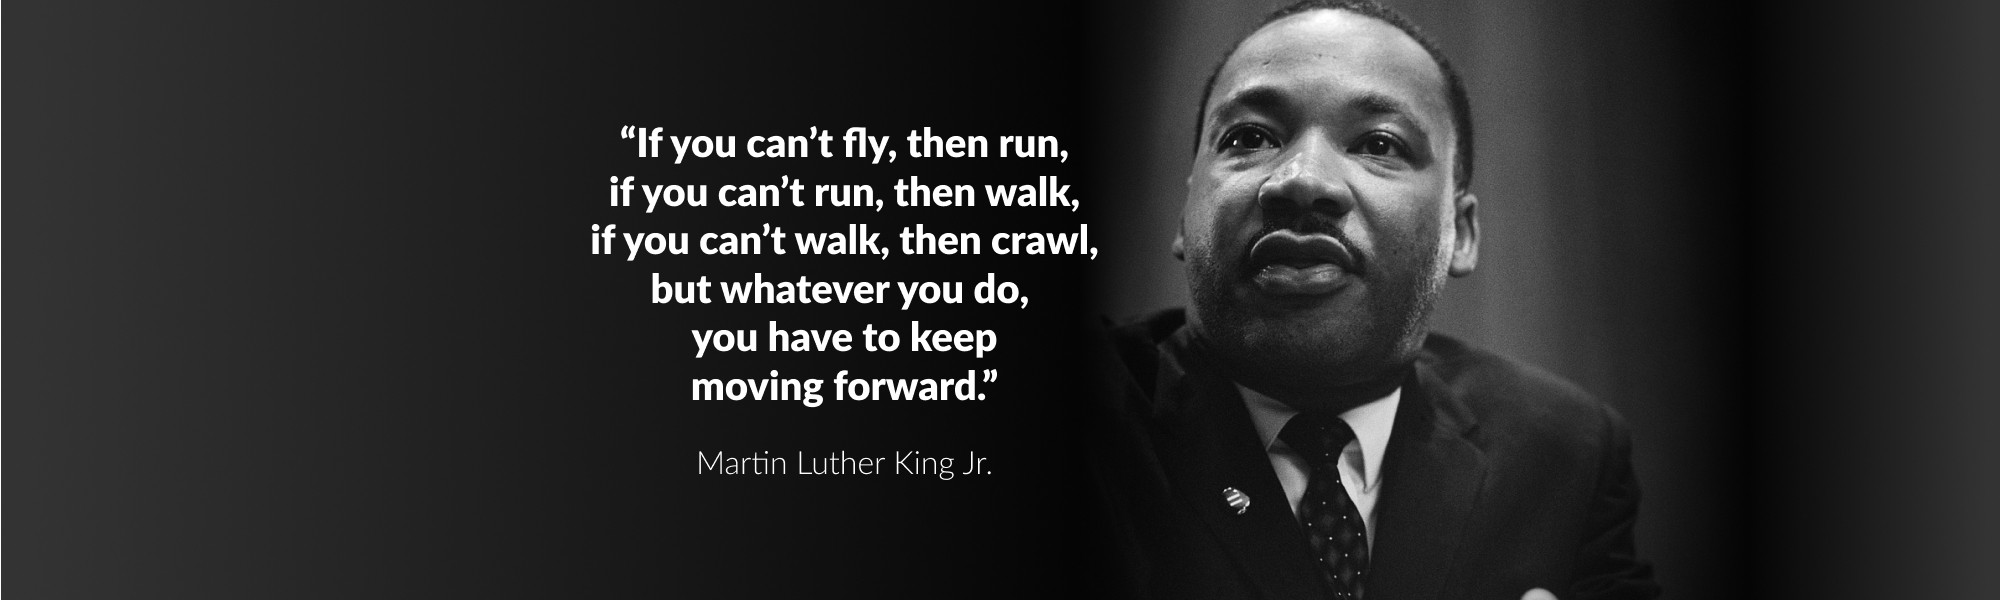 Martin Luther King Jr Quotes On Leadership
 Martin Luther King Jr Quotes Leadership